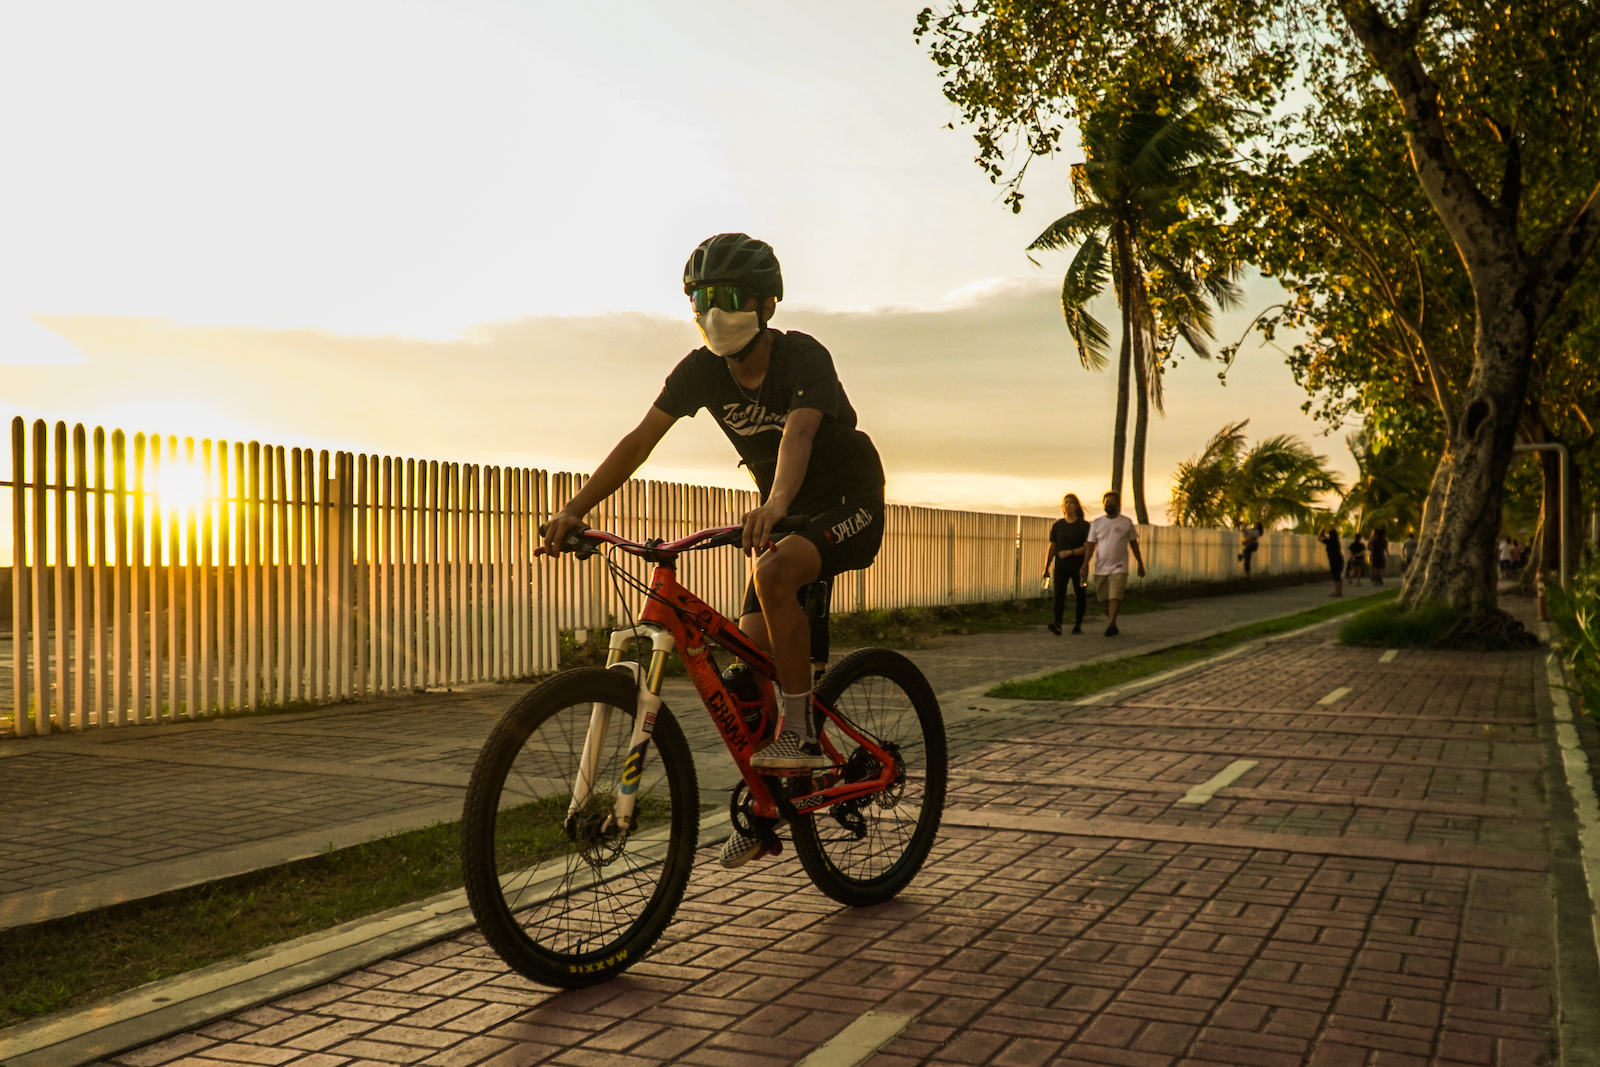 a person in a t-shire and shorts rides a bike at sunset on a paved street